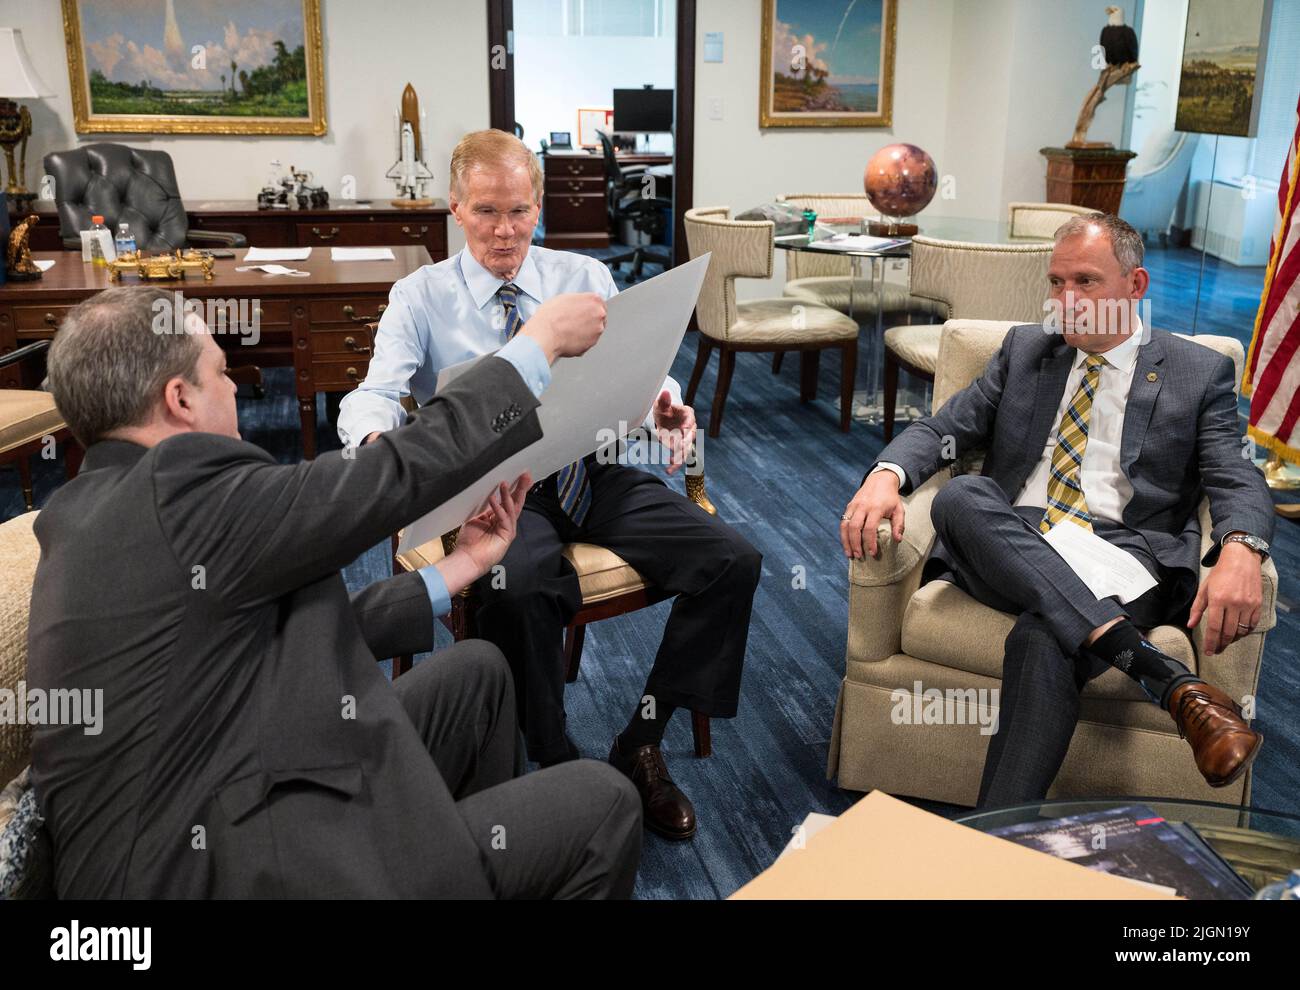 NASA Administrator Bill Nelson, center, and Associate Administrator for NASA’s Science Mission Directorate, Thomas Zurbuchen, right, react to the first full-color images from NASA’s James Webb Space Telescope in a preview meeting with Webb project scientist at the Space Telescope Science Institute, Klaus Pontoppidan, left, Monday, July 11, 2022 at the Mary W. Jackson NASA Headquarters building in Washington. The first images and spectroscopic data from the world’s largest and most powerful space telescope, set to be released July 11 and 12, will demonstrate Webb at its full power, as it begins Stock Photo